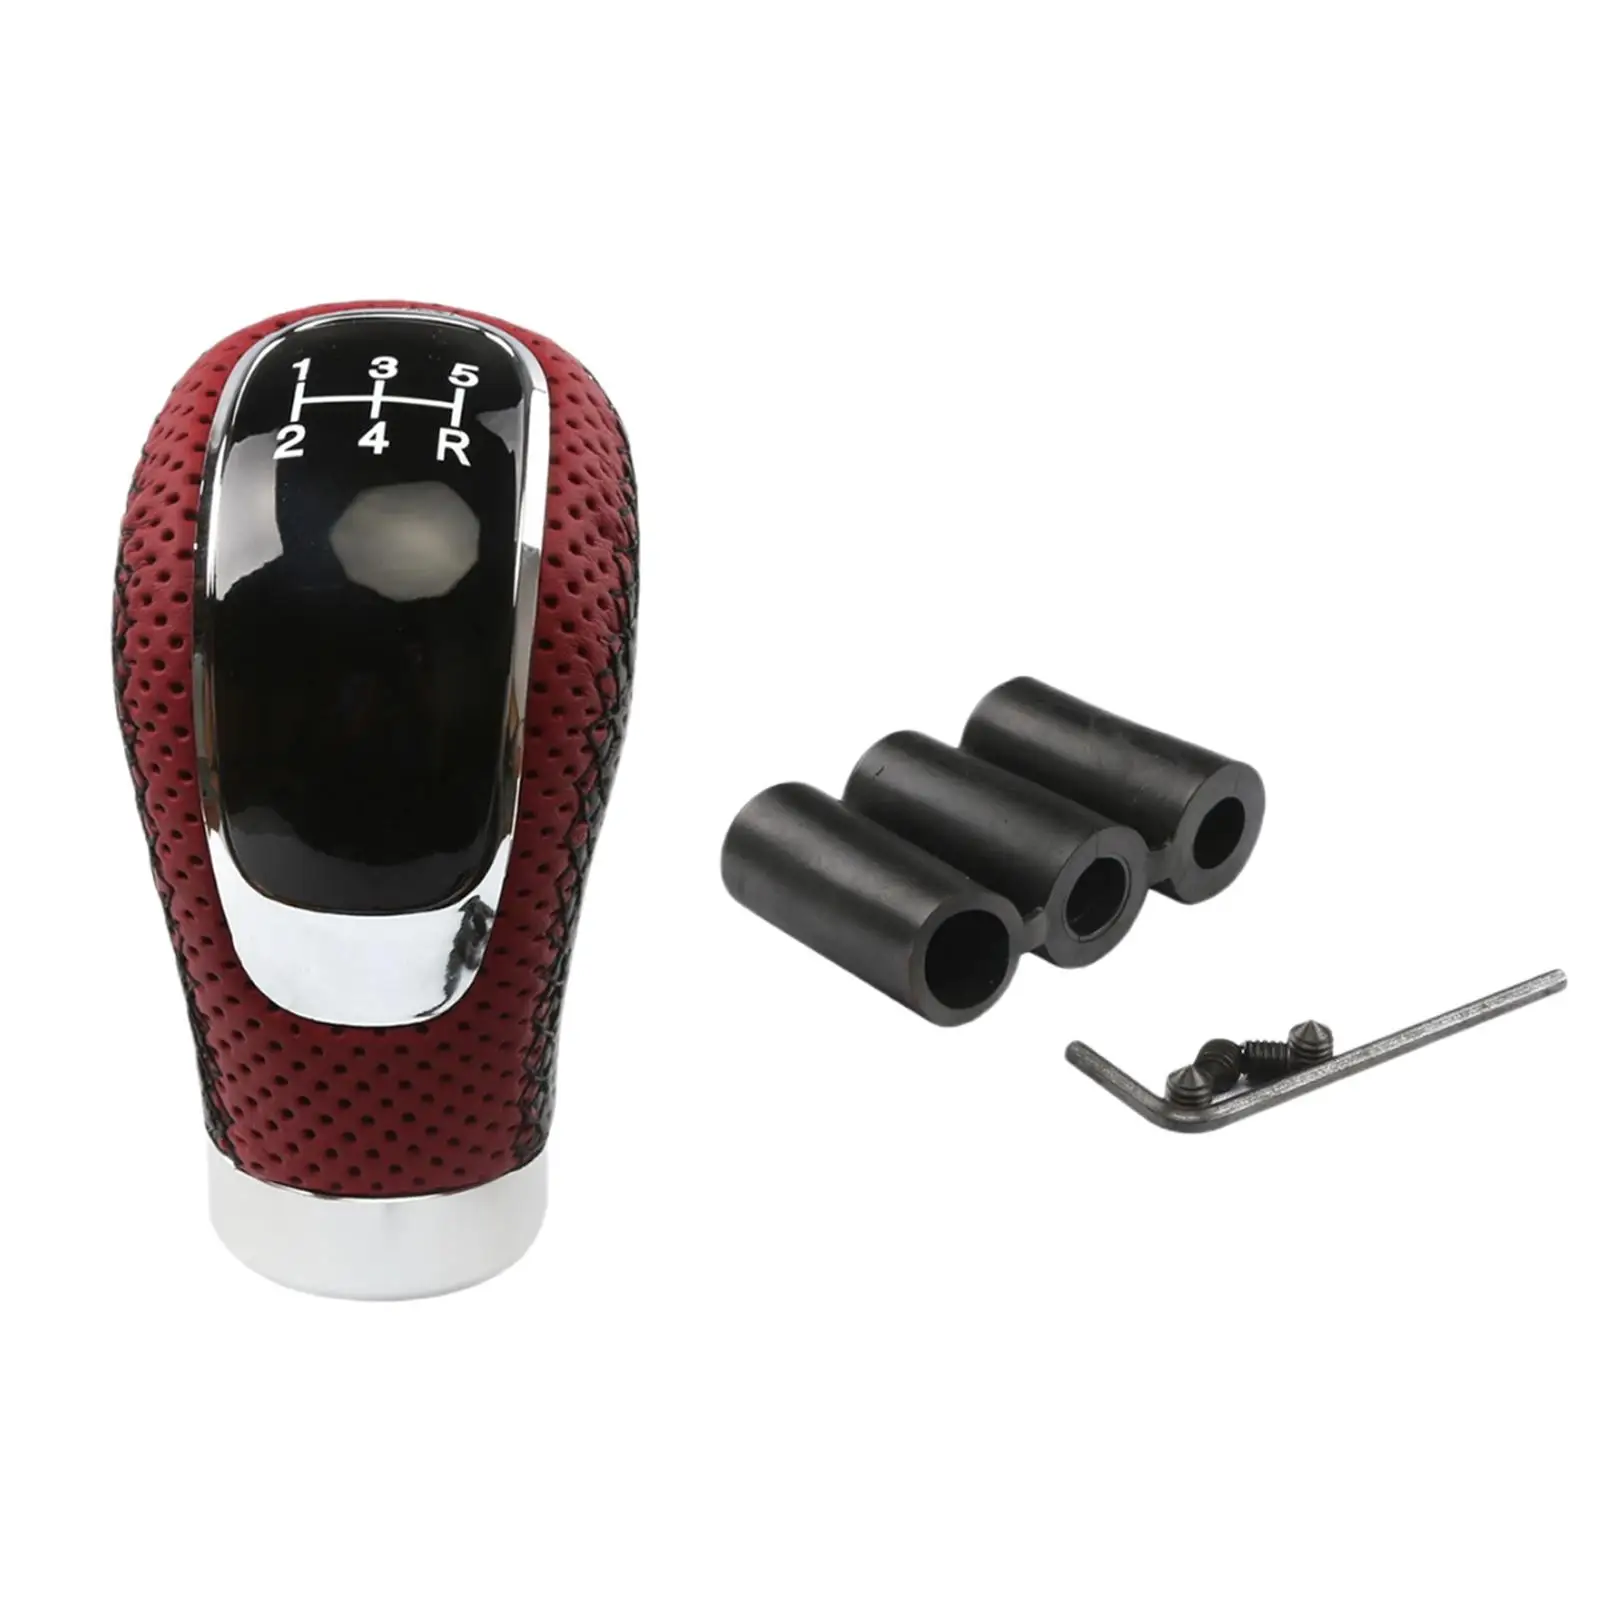 5 Speed Manual Gear Shift Knob Aluminum Alloy Accessories Shifting Handle for Cars